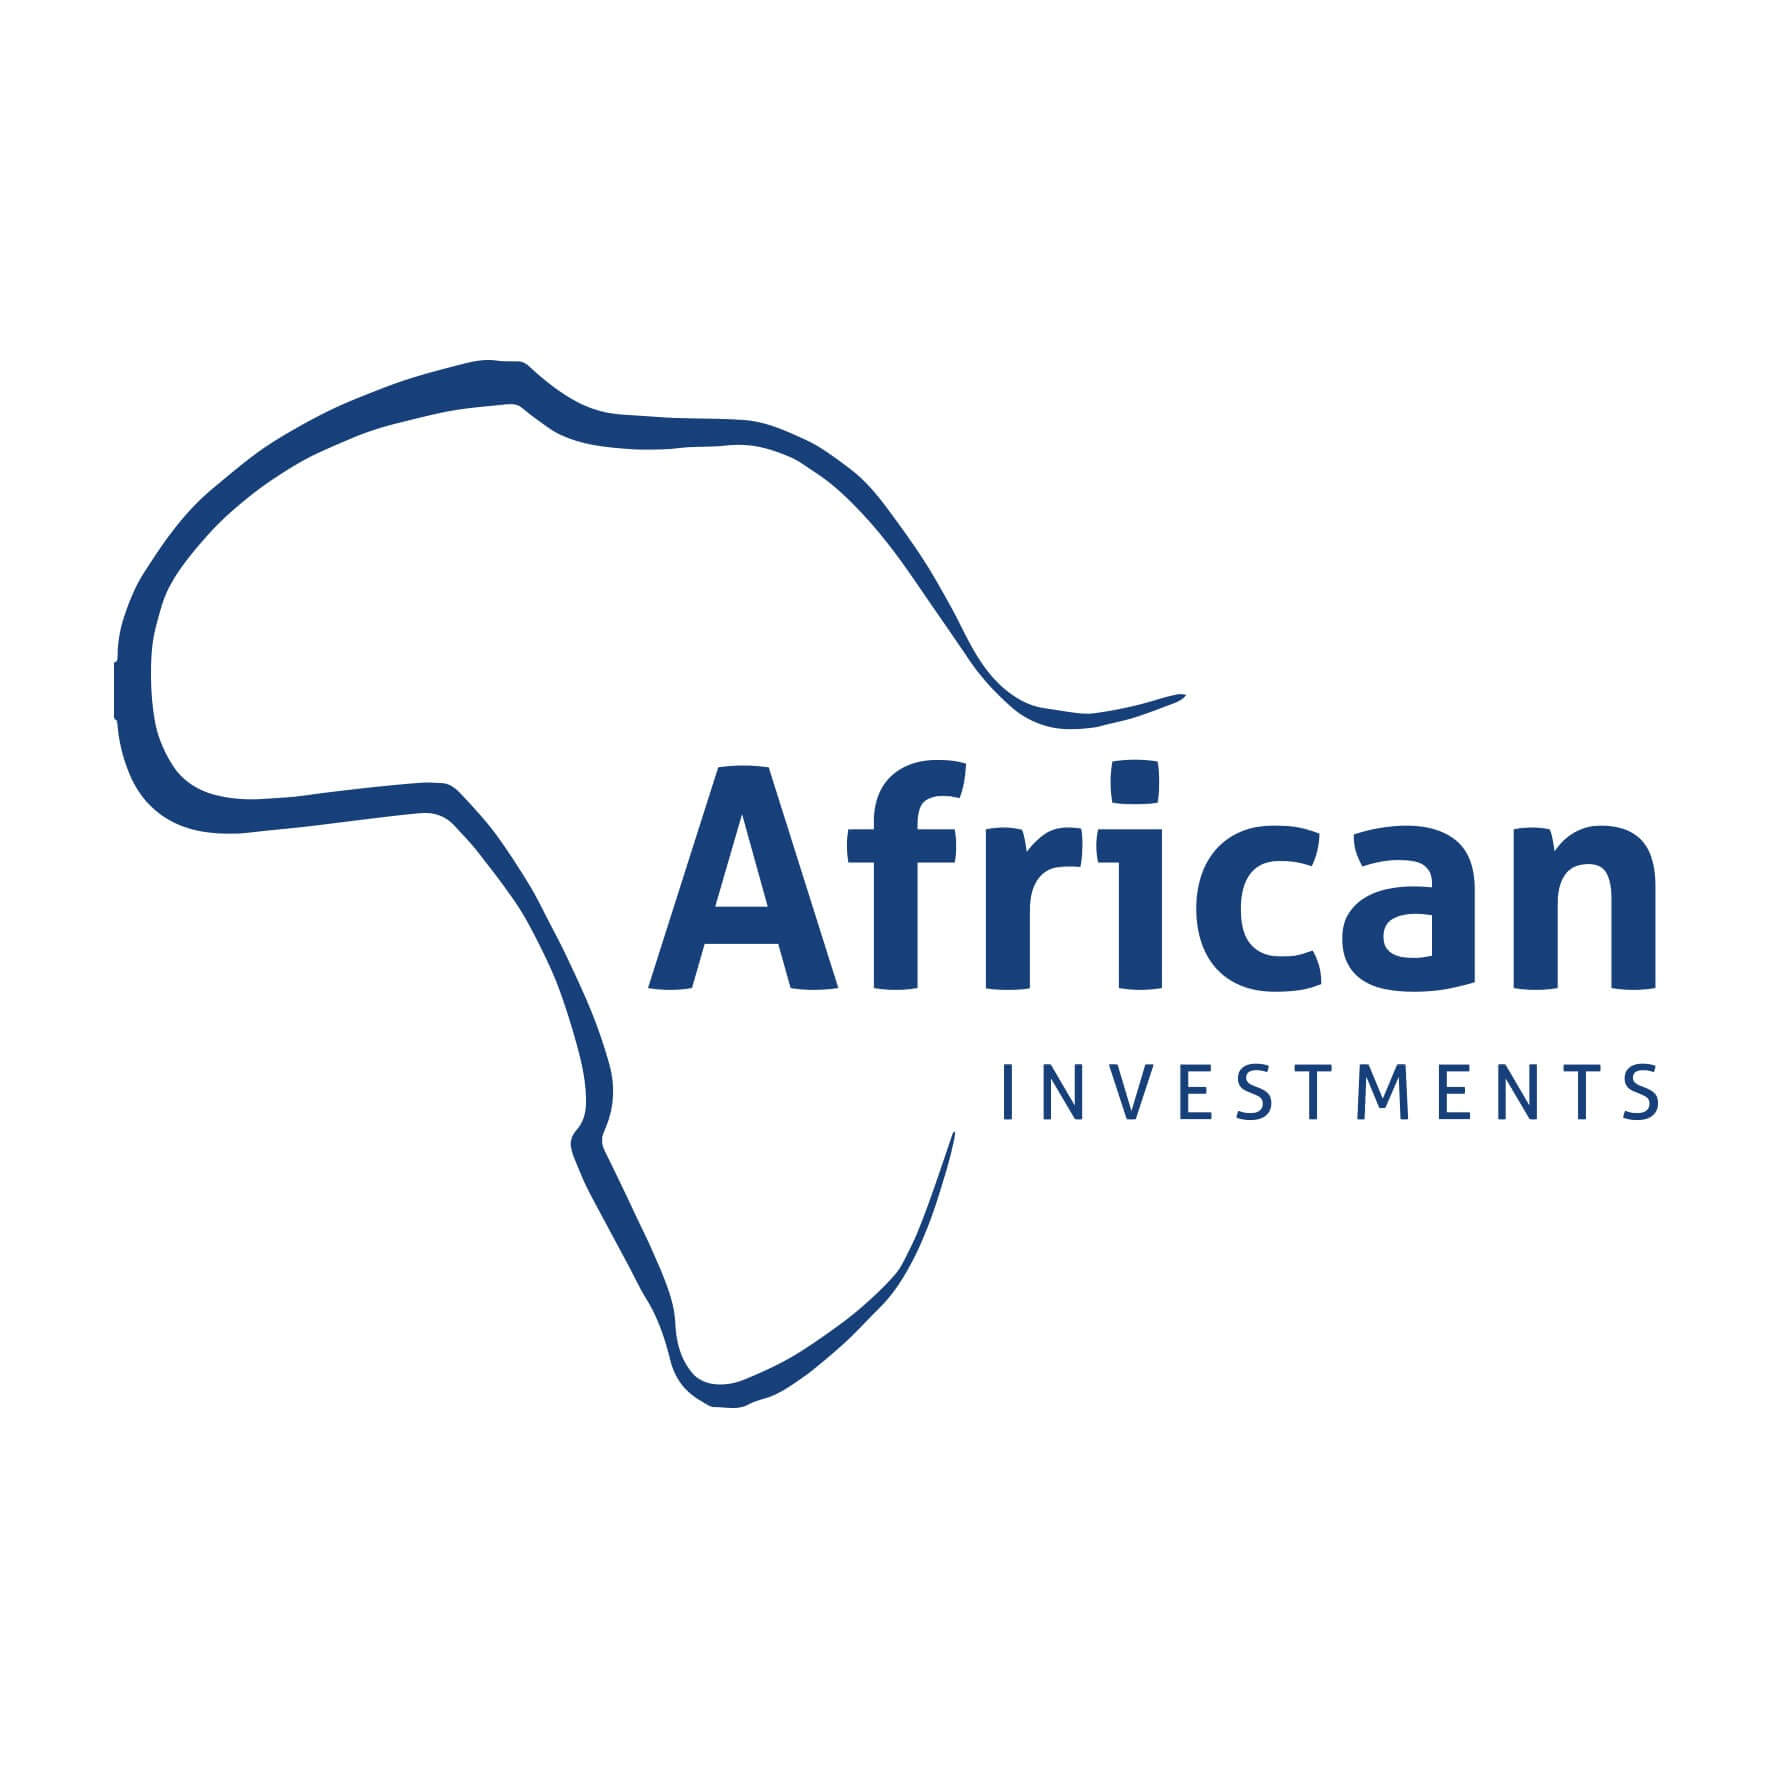 https://invest-in-africa.co/wp-content/uploads/2020/06/African-Investments-Logo.jpg